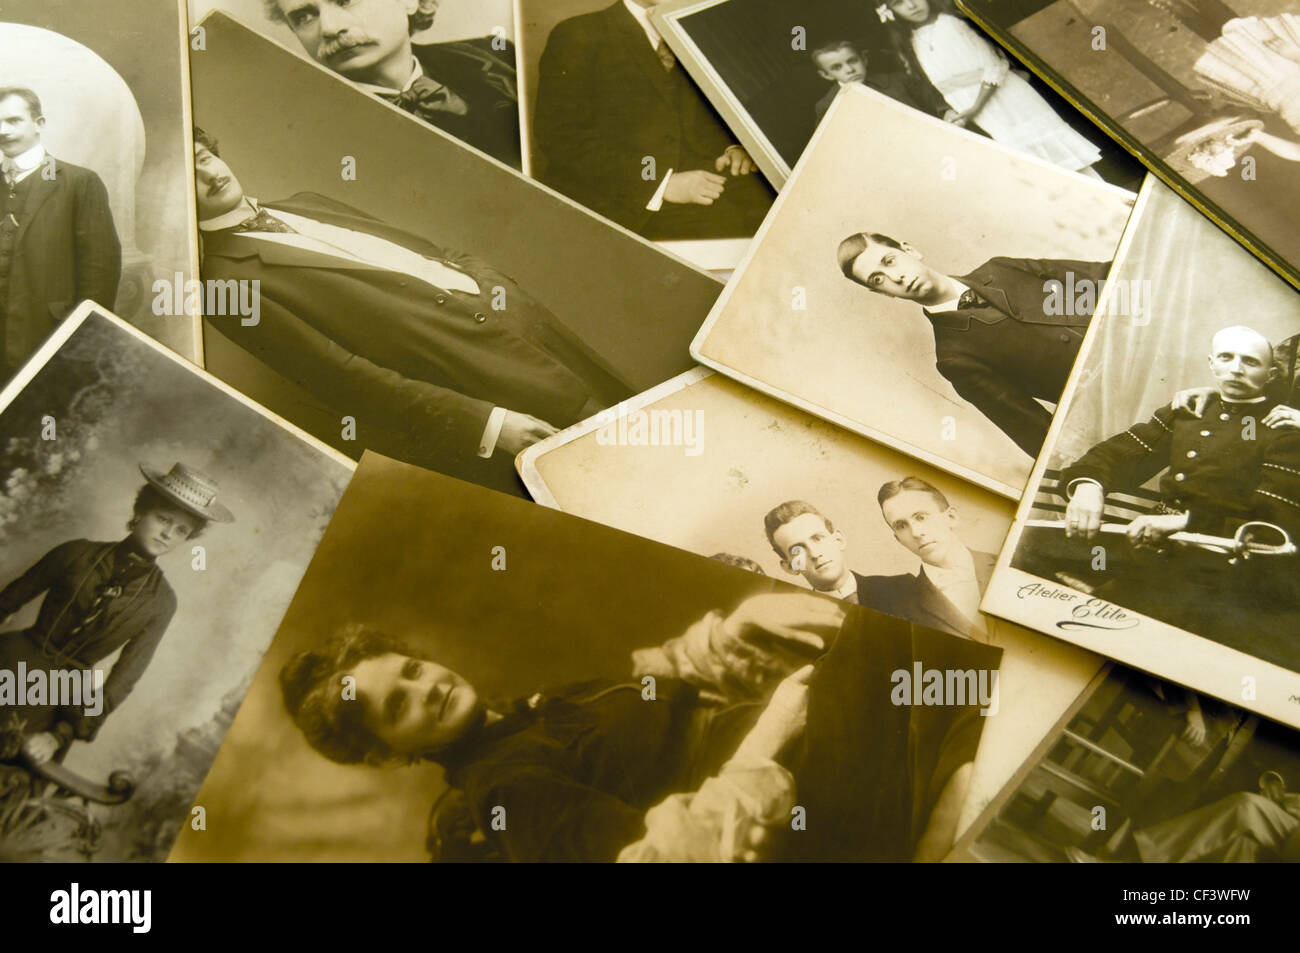 background of old vintage photographs Stock Photo